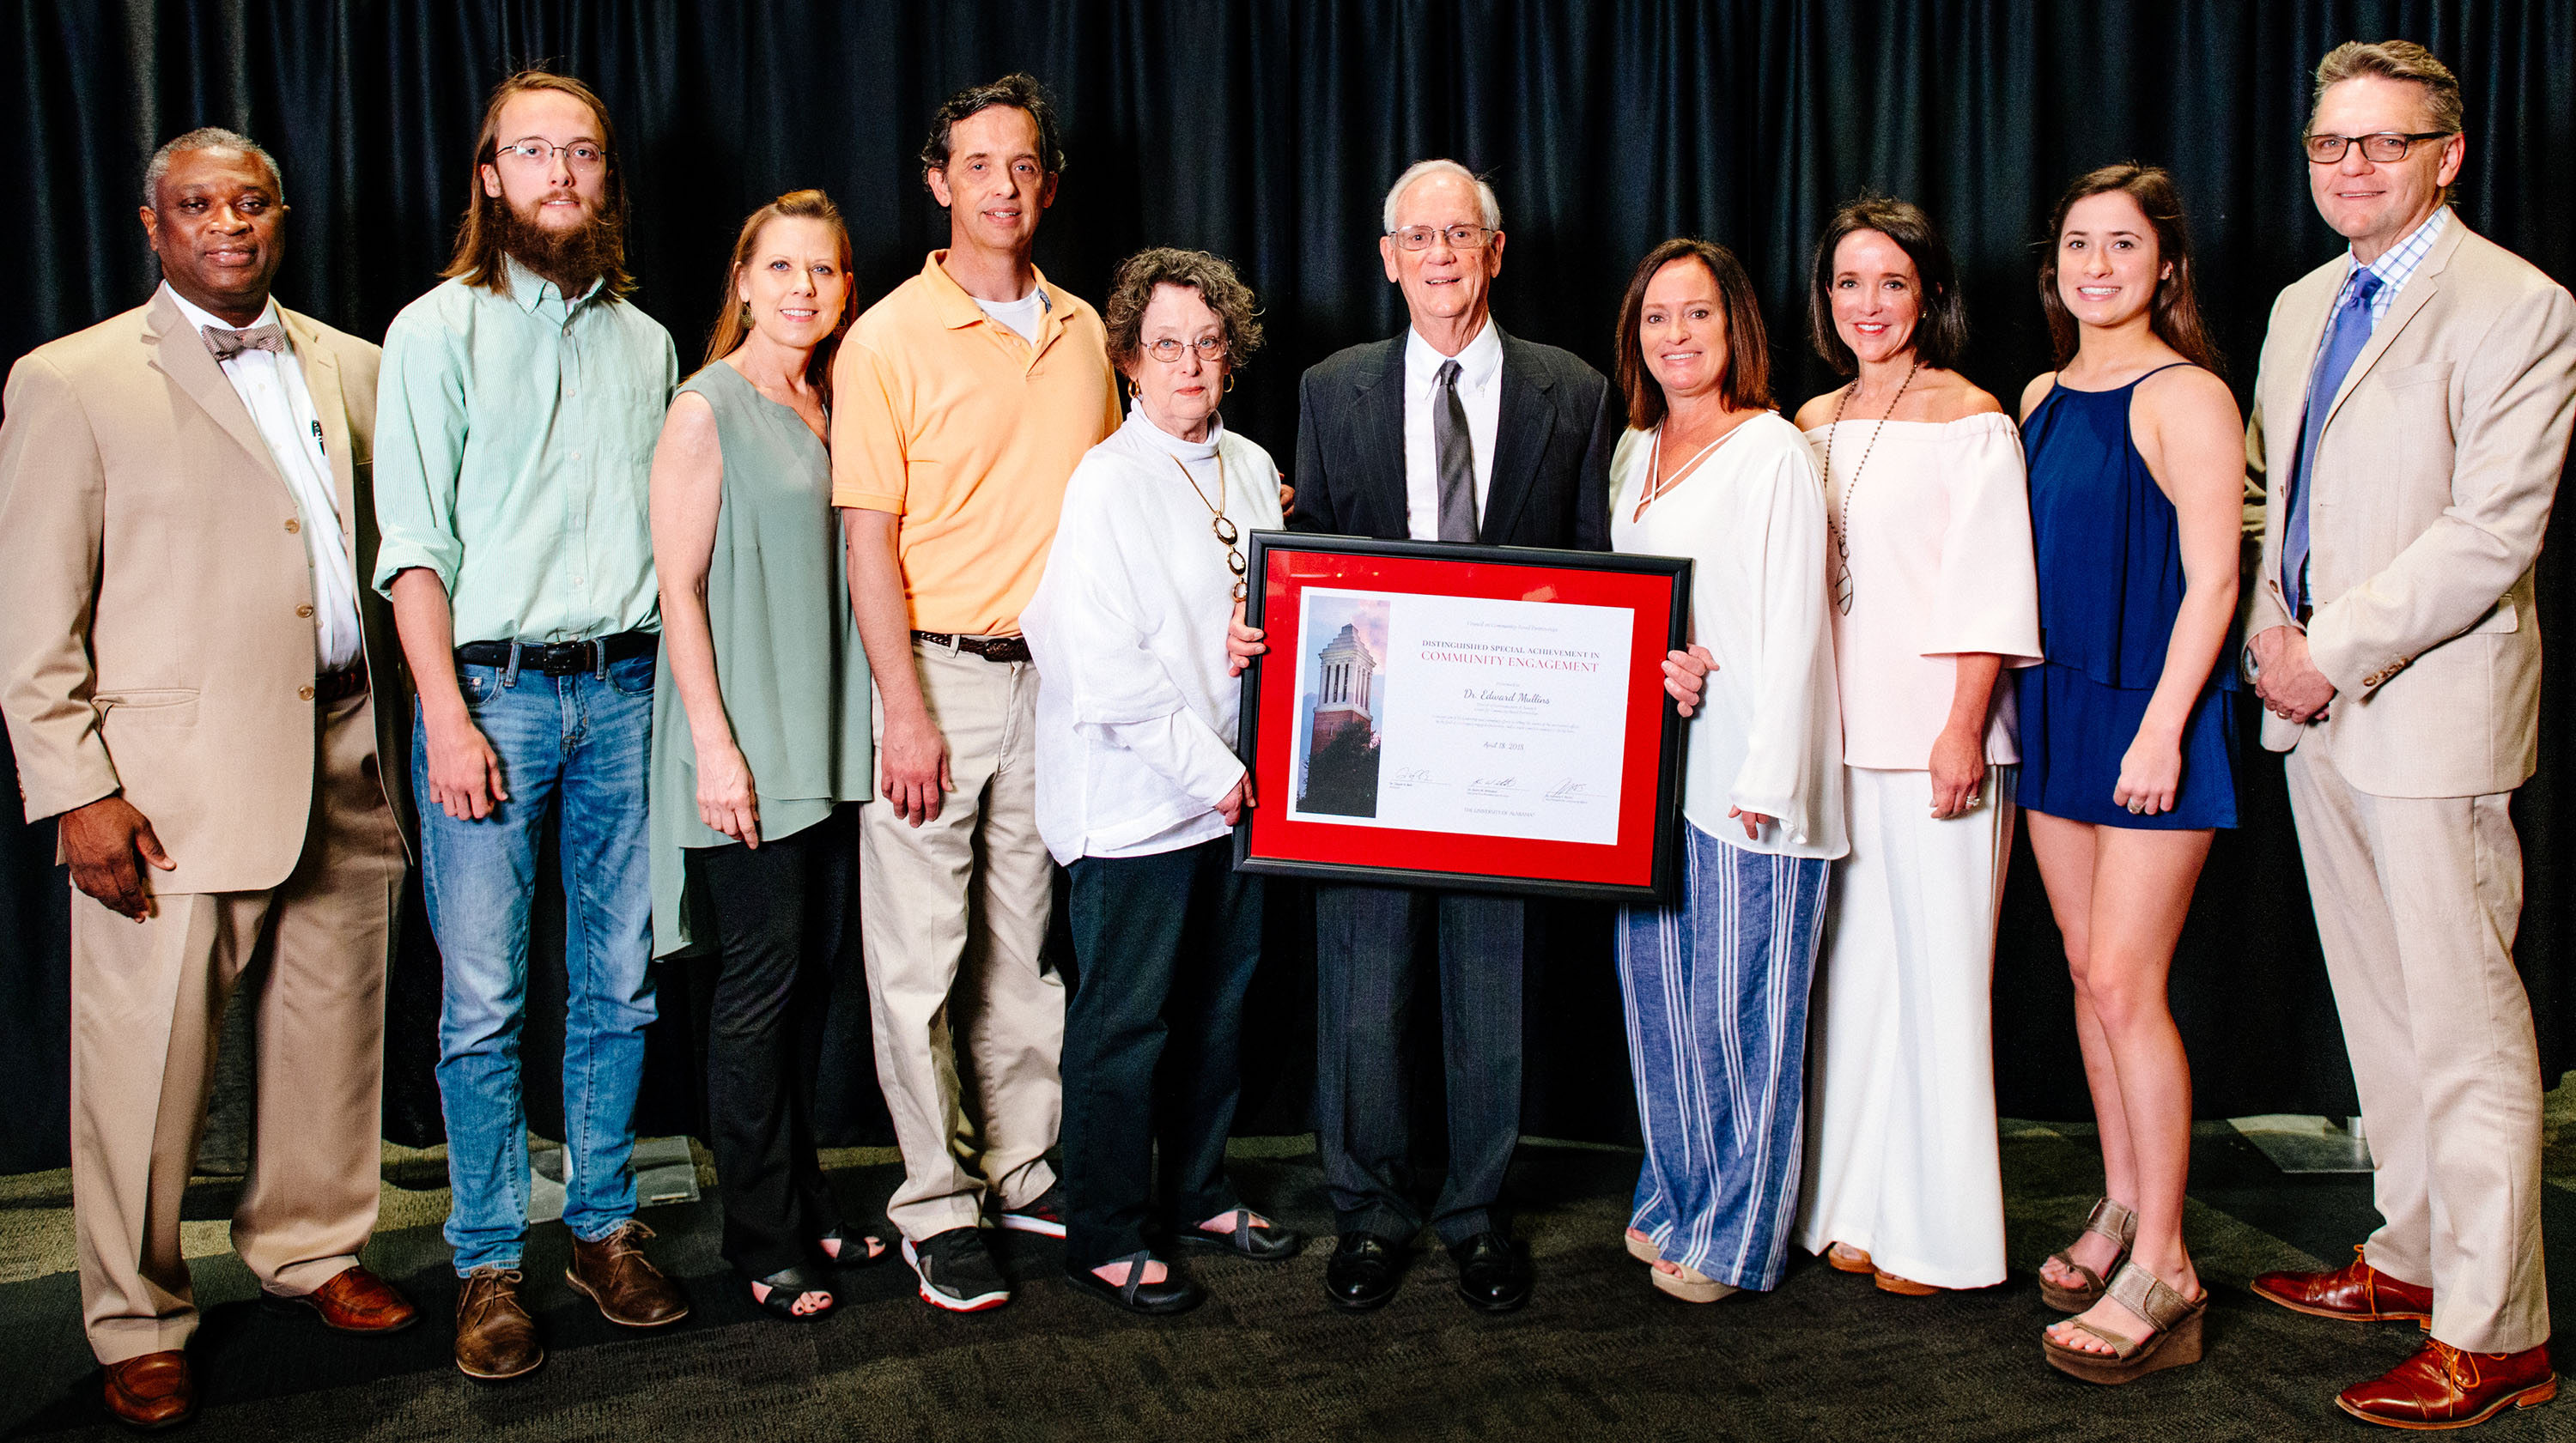 Ed Mullins stands with his family and Vice President Samory T. Pruitt and Dean Peter Hlebowitsh after receiving the 2018 award for Outstanding Special Achievement in Community-Engaged Scholarship.